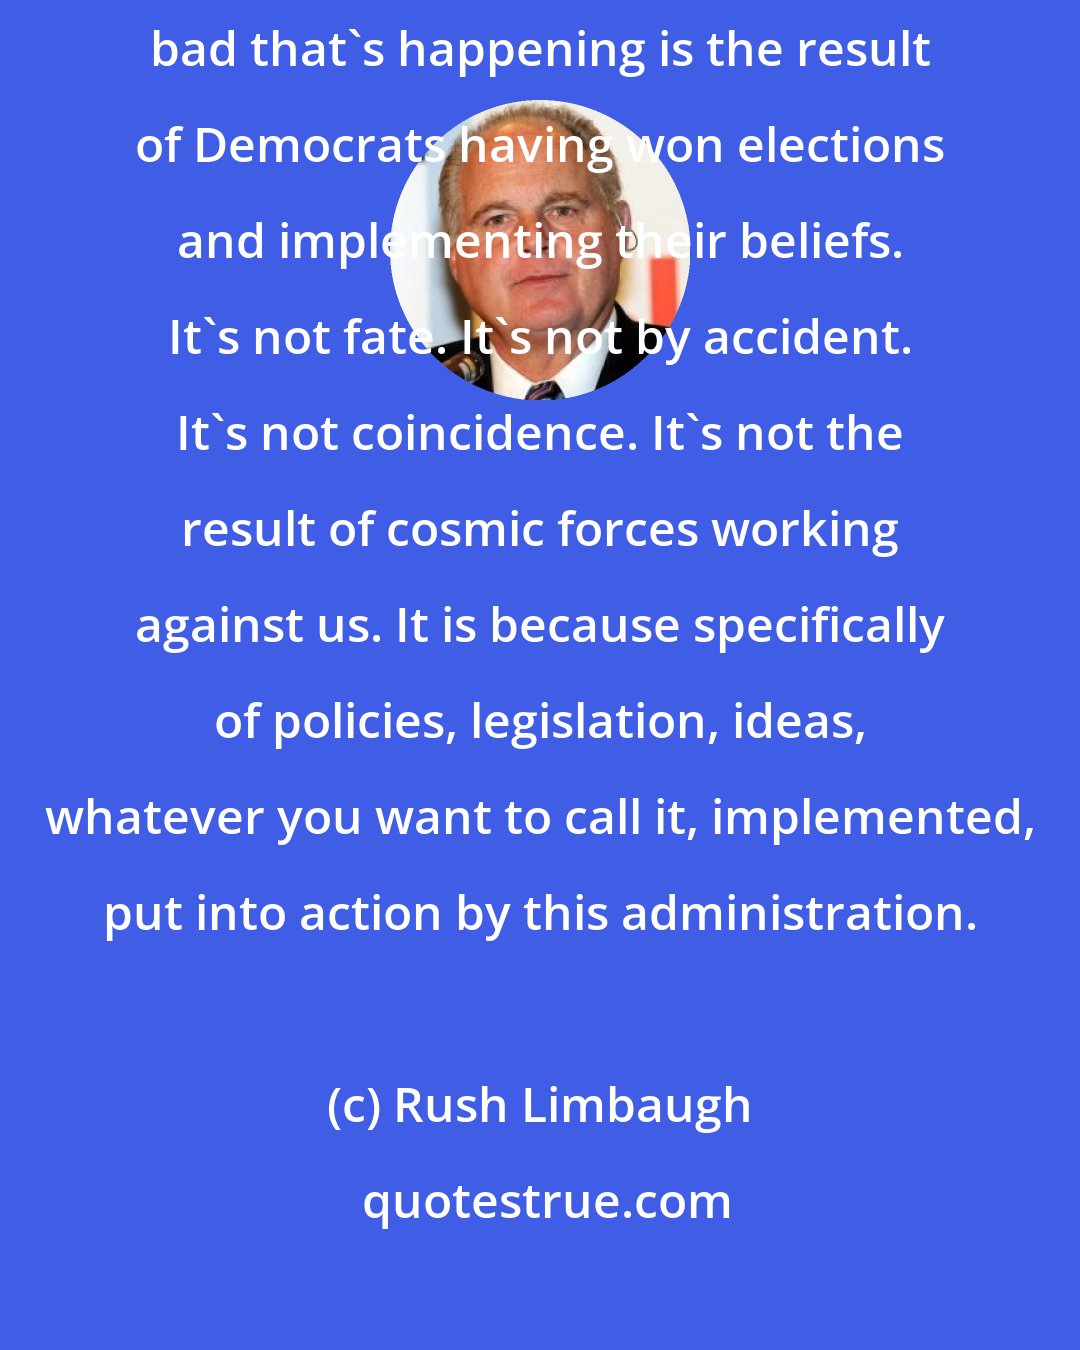 Rush Limbaugh: The Democrats are not seeking reelection on anything good. And everything bad that's happening is the result of Democrats having won elections and implementing their beliefs. It's not fate. It's not by accident. It's not coincidence. It's not the result of cosmic forces working against us. It is because specifically of policies, legislation, ideas, whatever you want to call it, implemented, put into action by this administration.